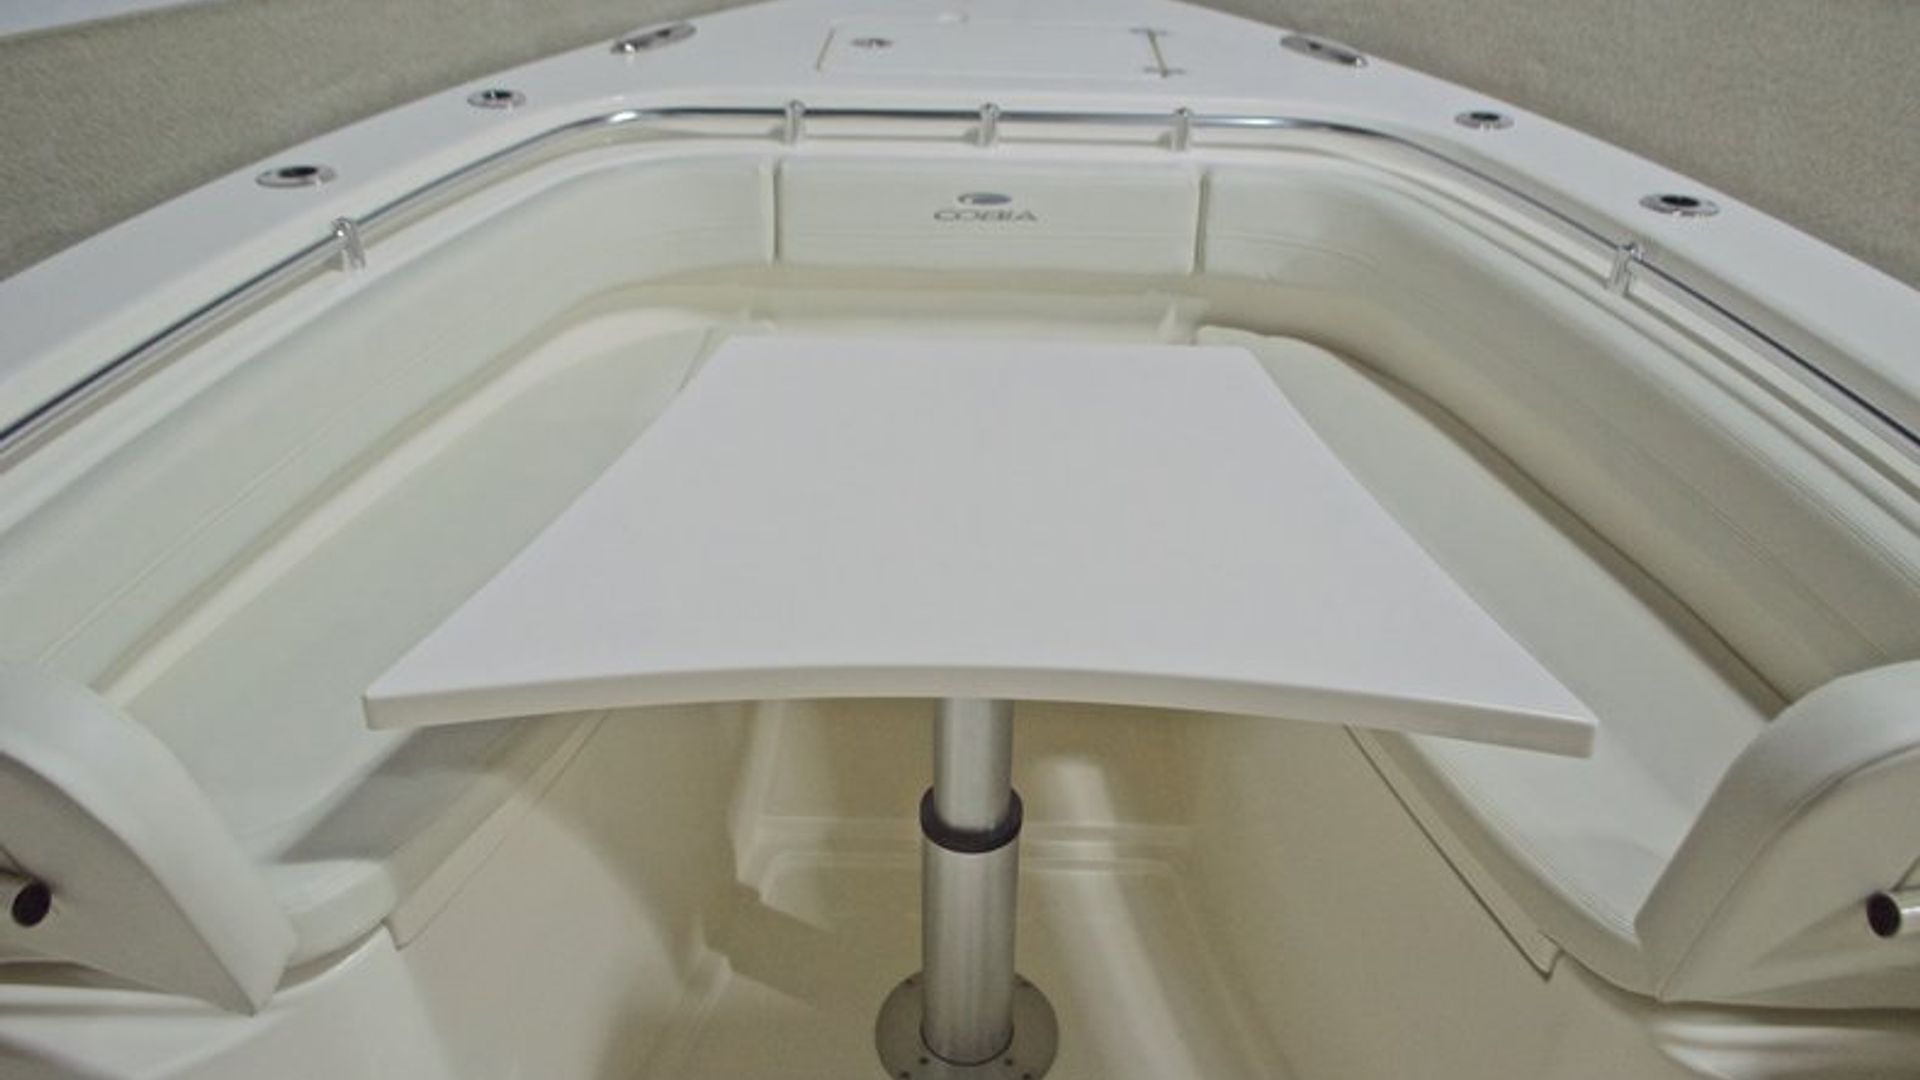 New 2017 Cobia 296 Center Console #N027 image 54